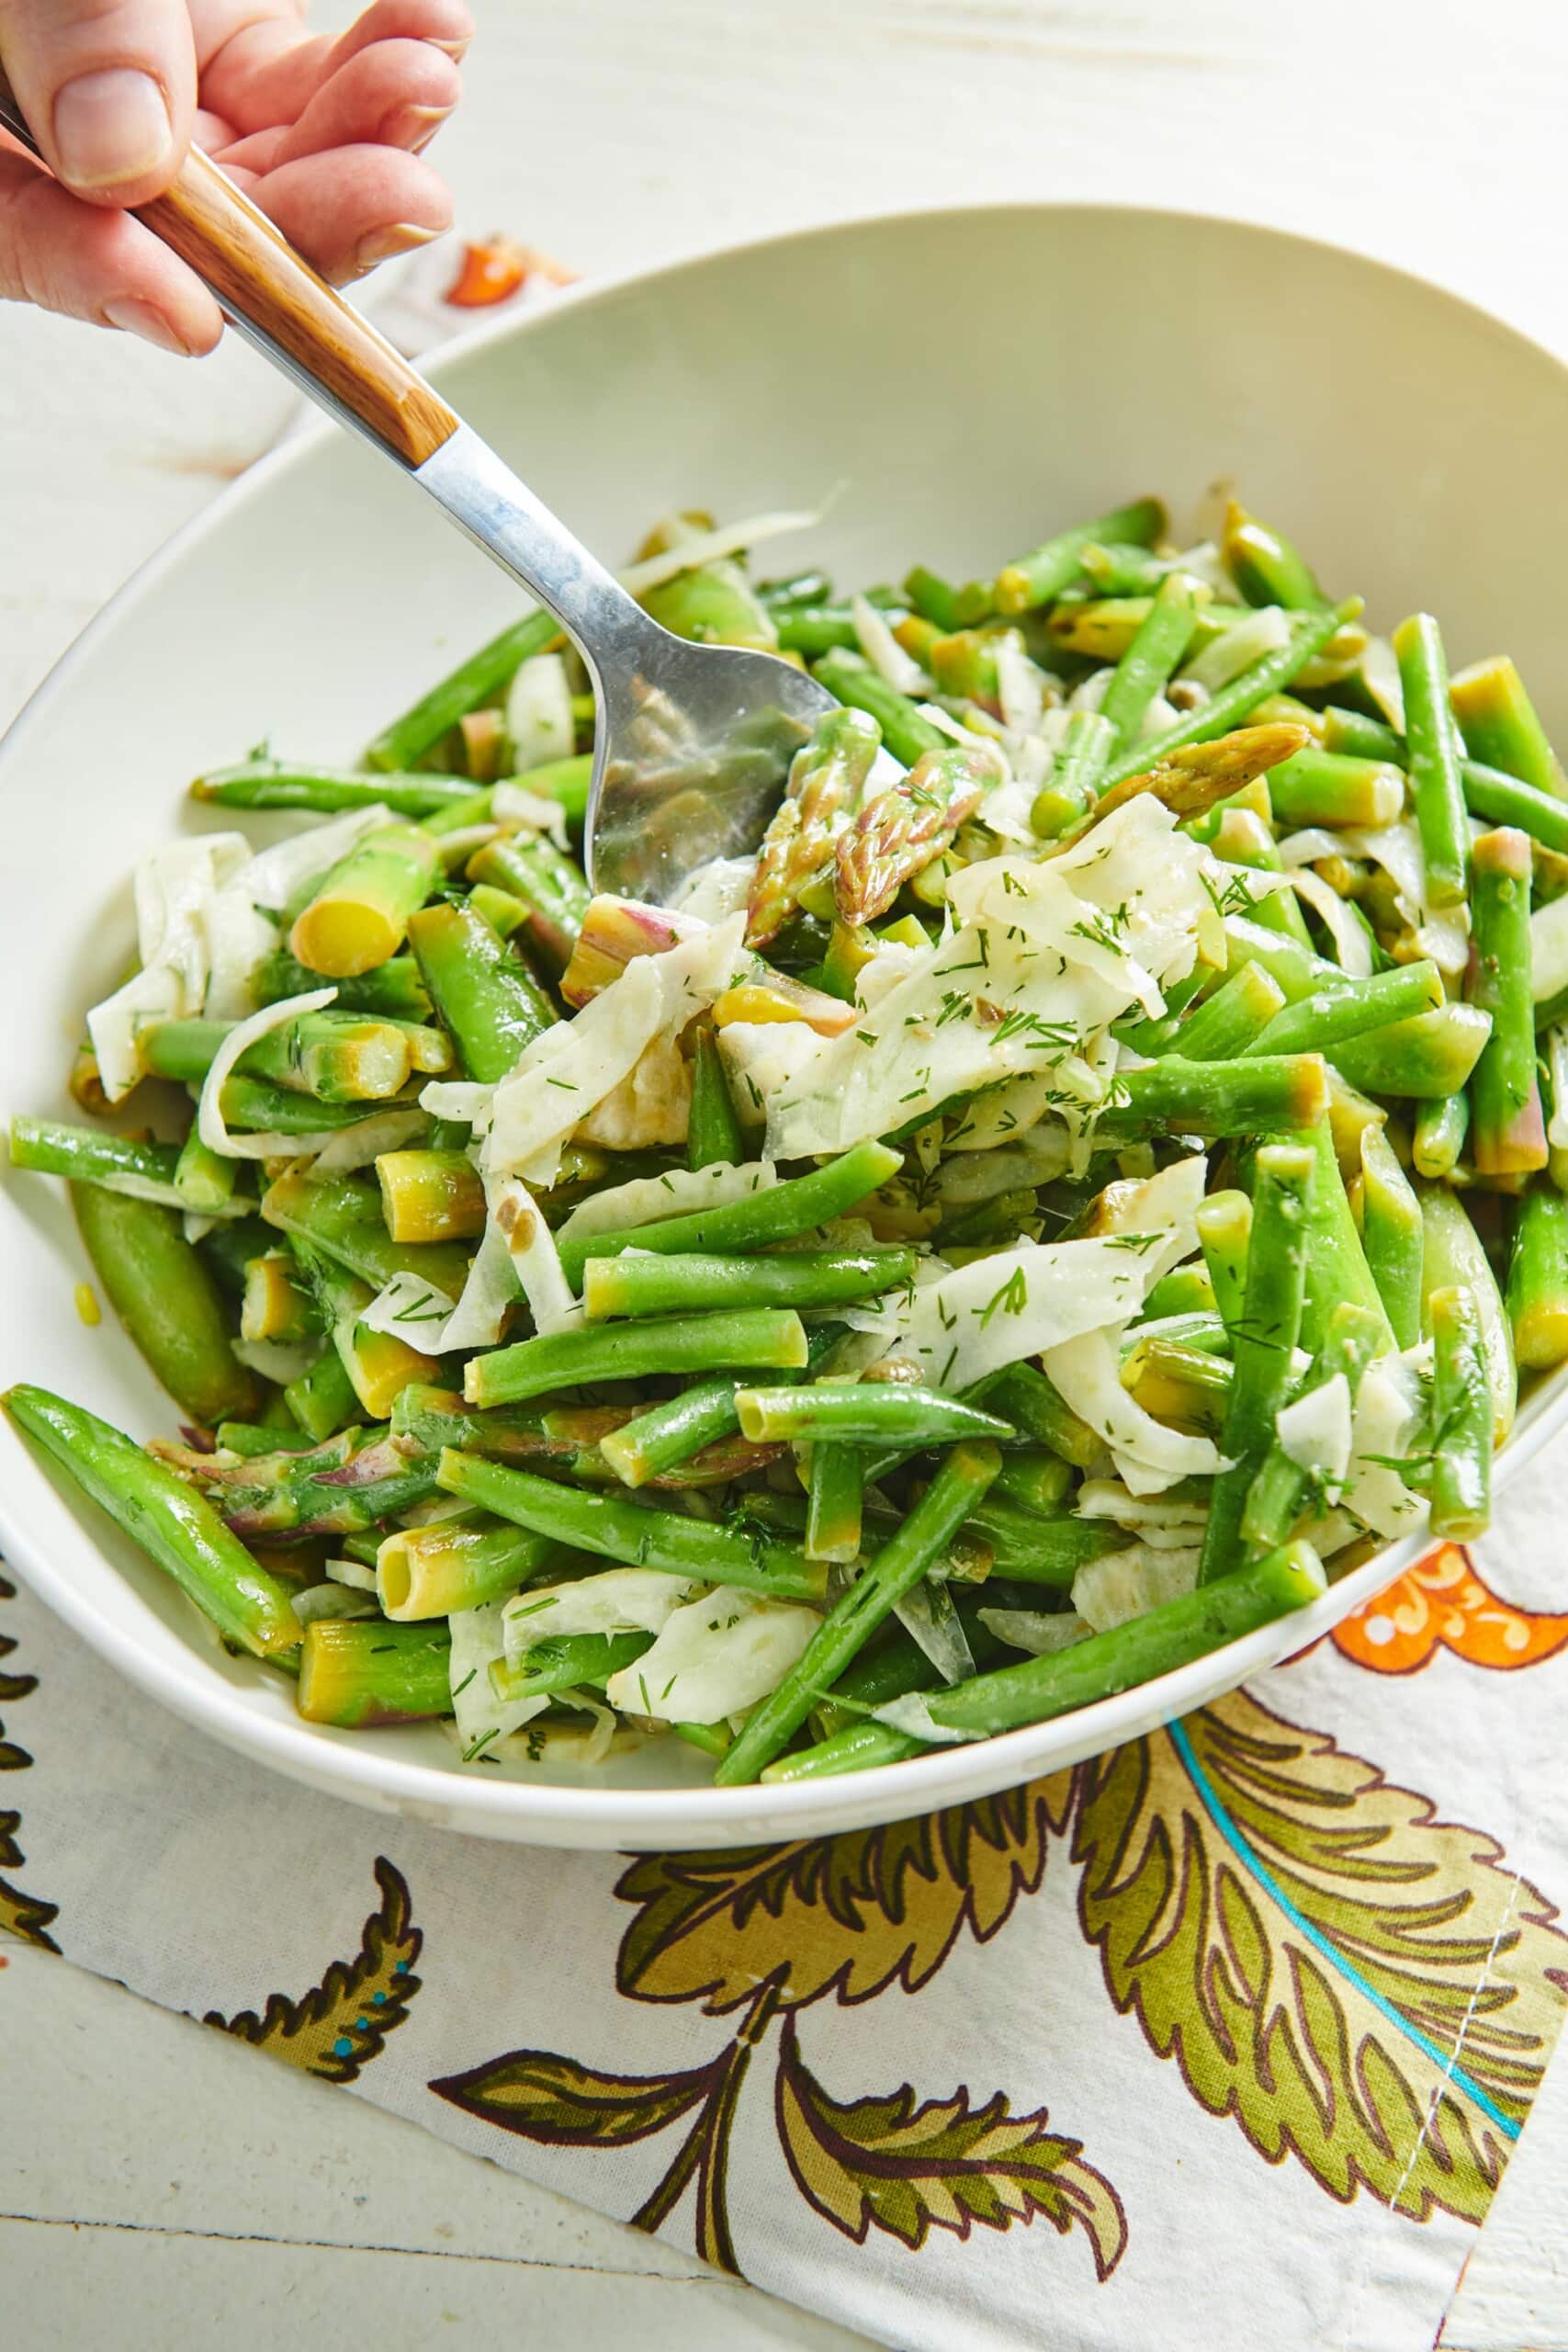 Spoon in a bowl of Spring Vegetable Salad.